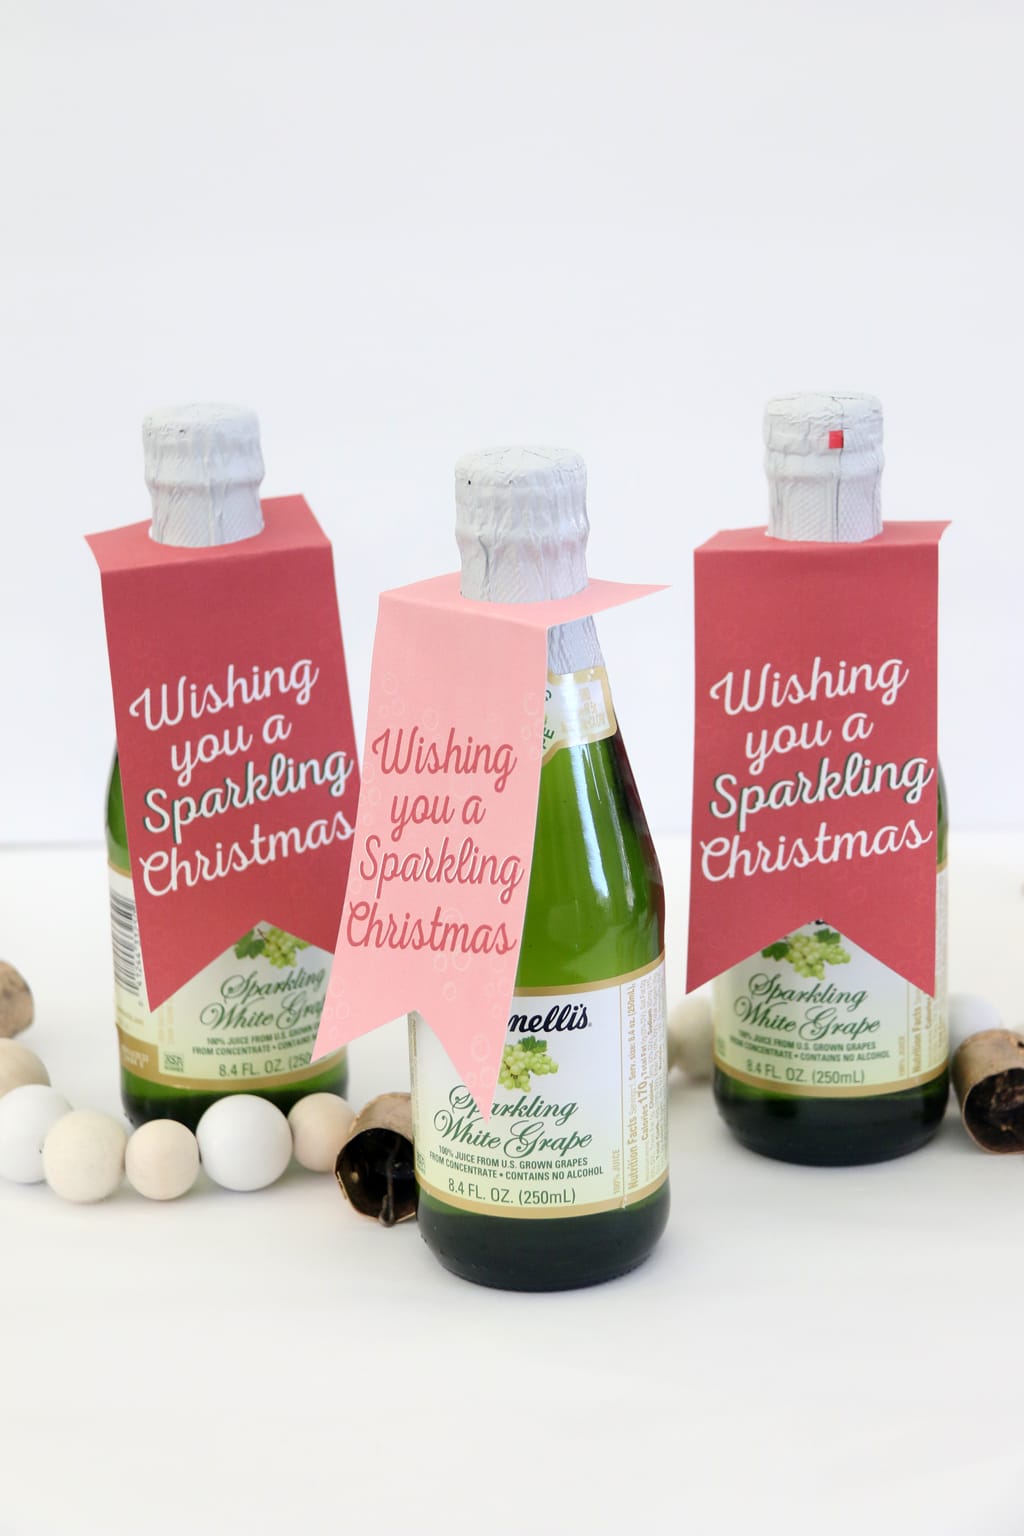 Wishing you a Sparkling Christmas printable tag on a bottle of sparkling cider.